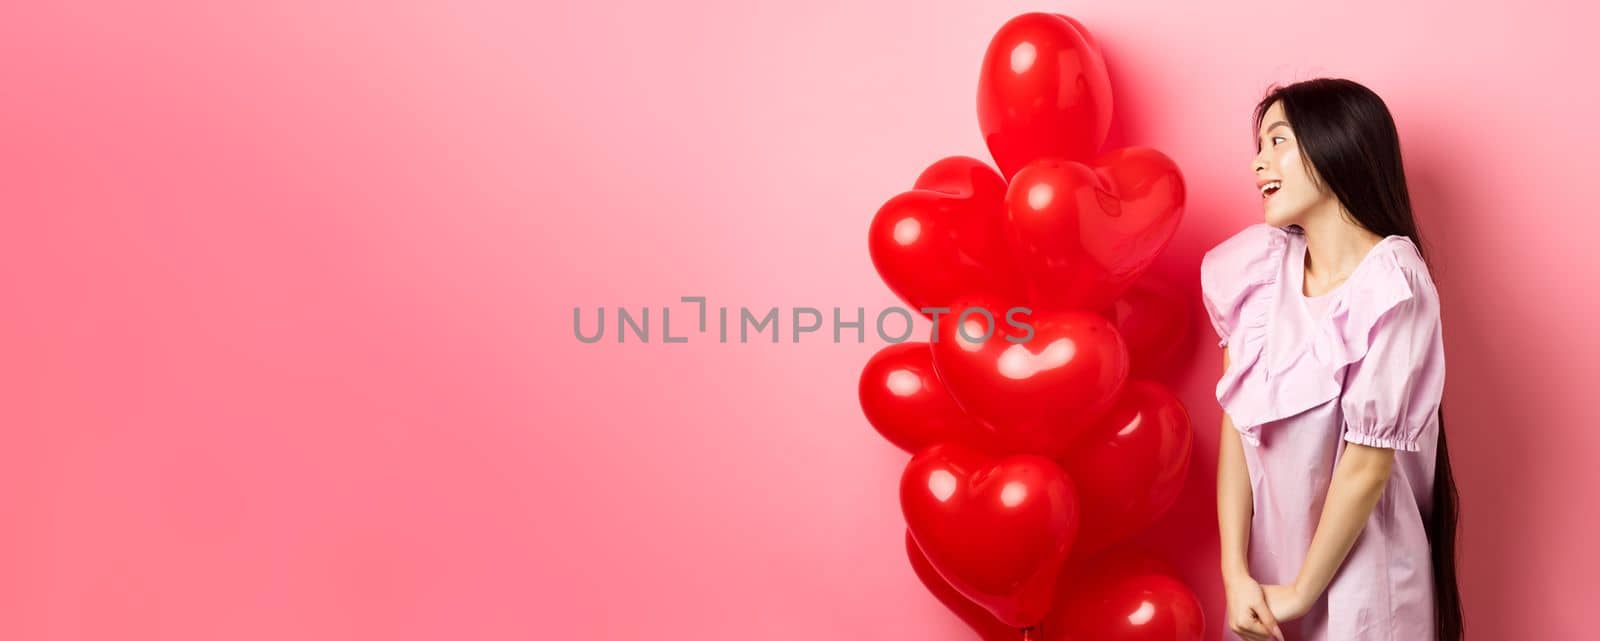 Romance and love concept. Romantic asian girl looking with affection and sympathy at empty space, standing near red hearts balloons from lover, pink background.